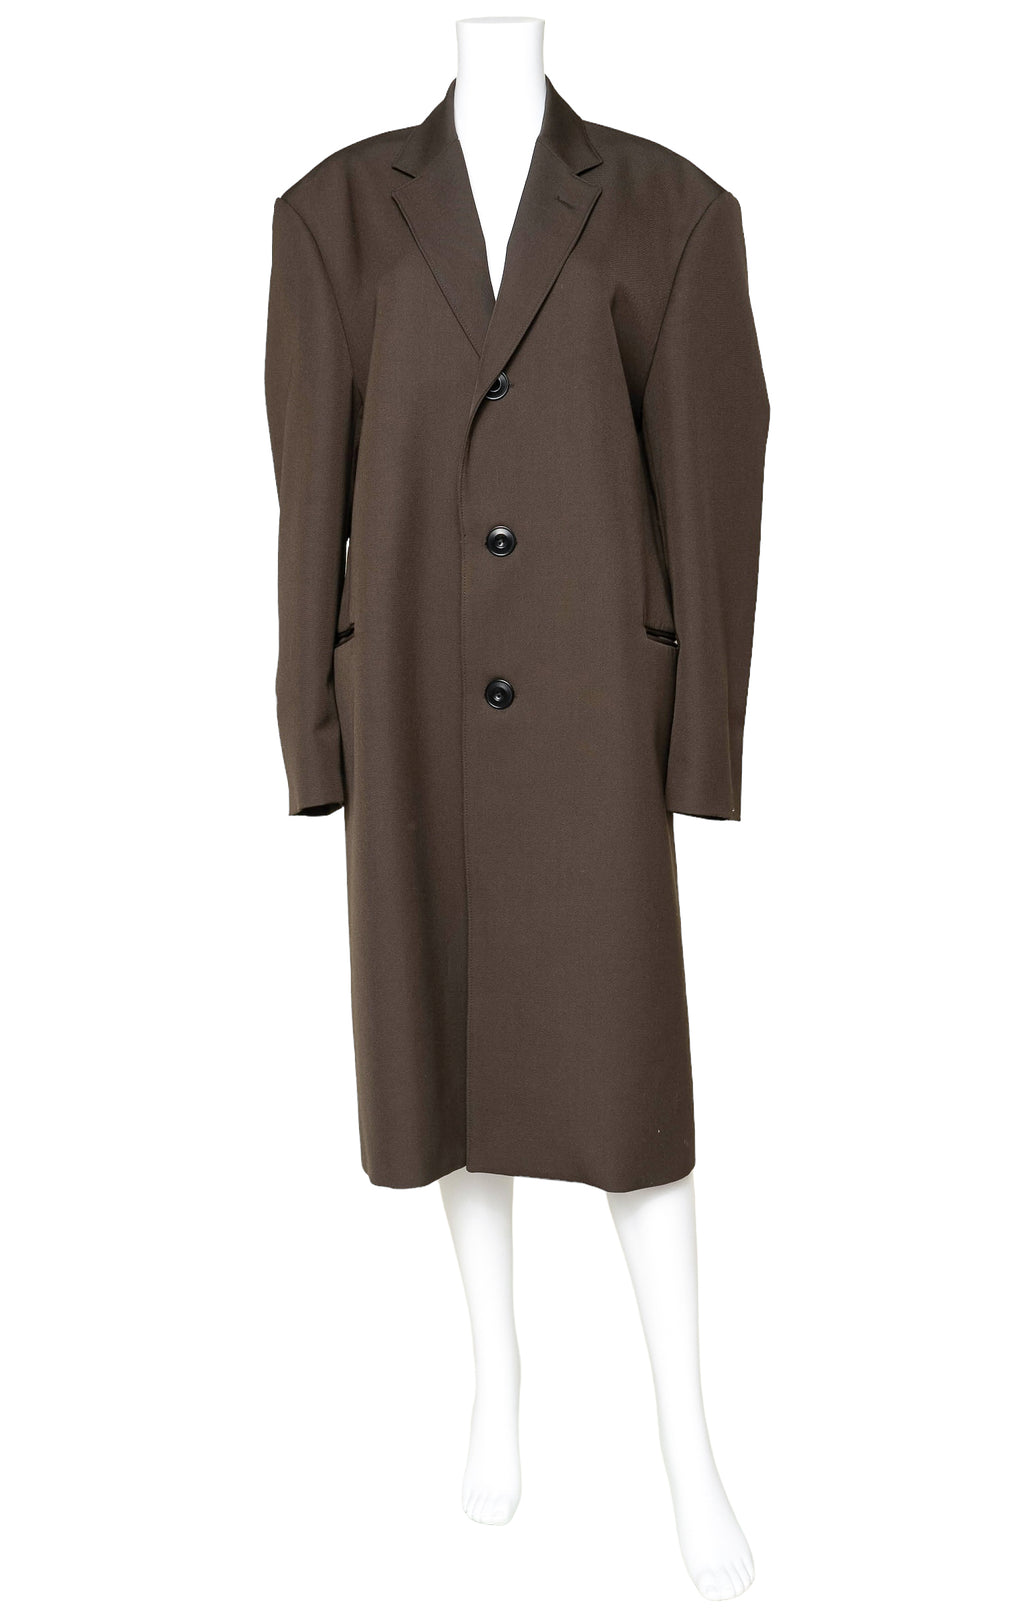 LEMAIRE (RARE) Coat Size: No size tags, fits like L-XL